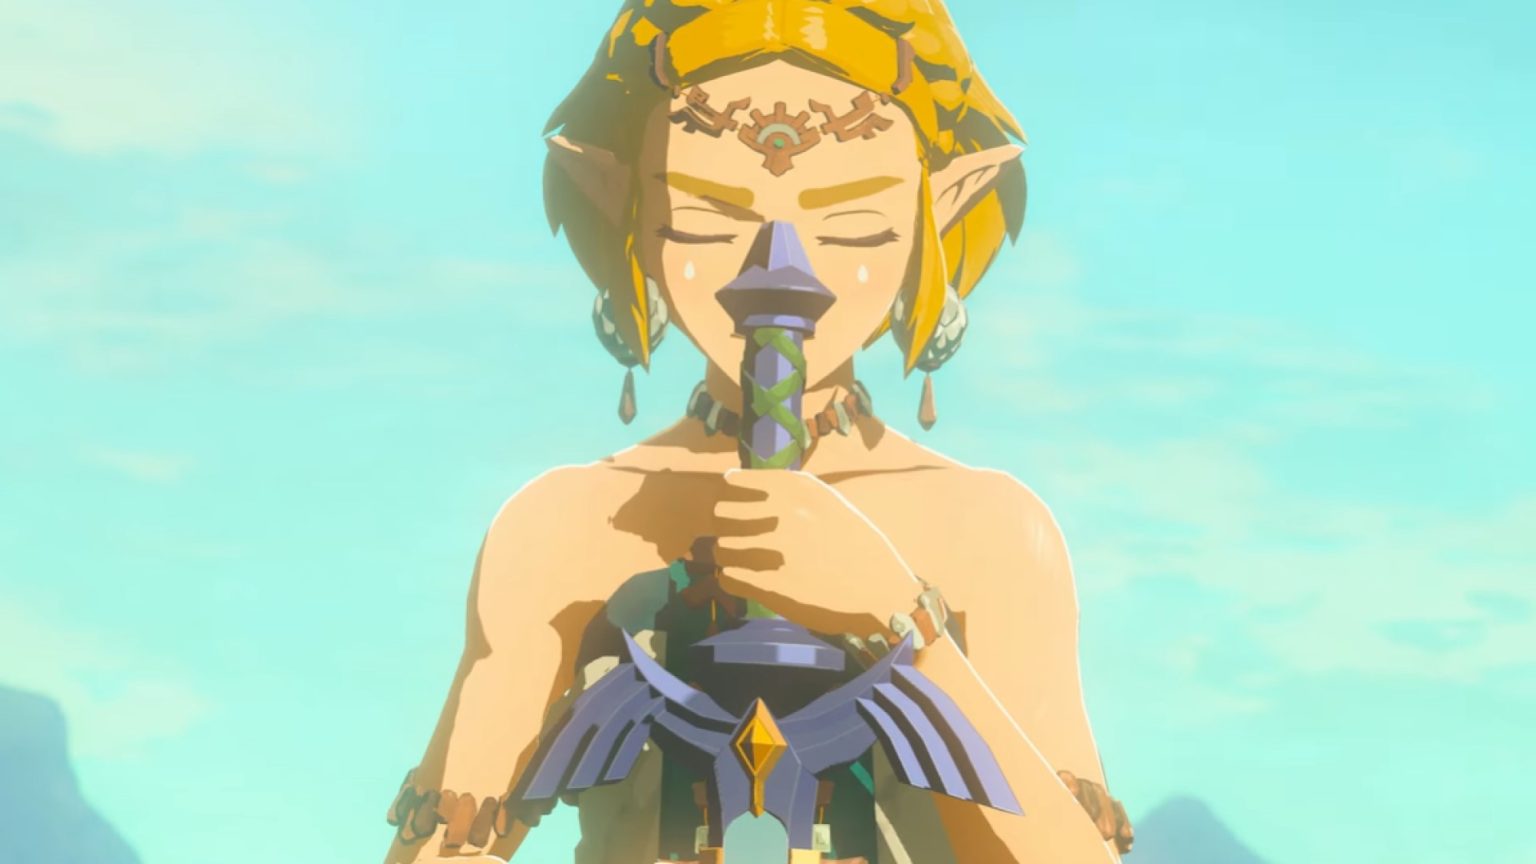 Rumour: The Legend of Zelda game with Zelda as a protagonist may be in development